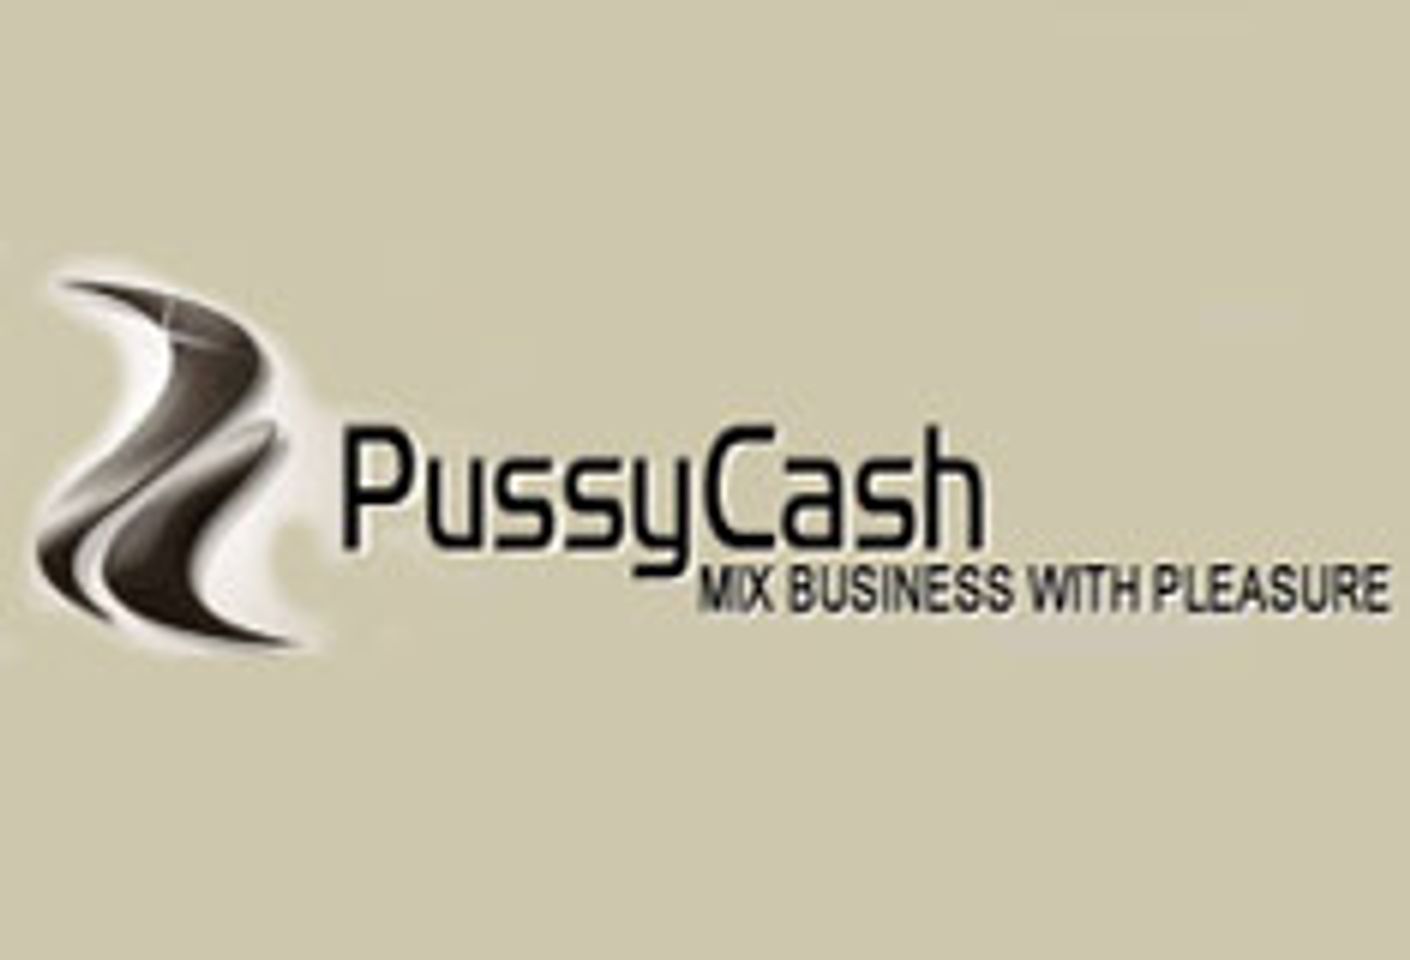 PussyCash Paying $100 for IMLive Signups